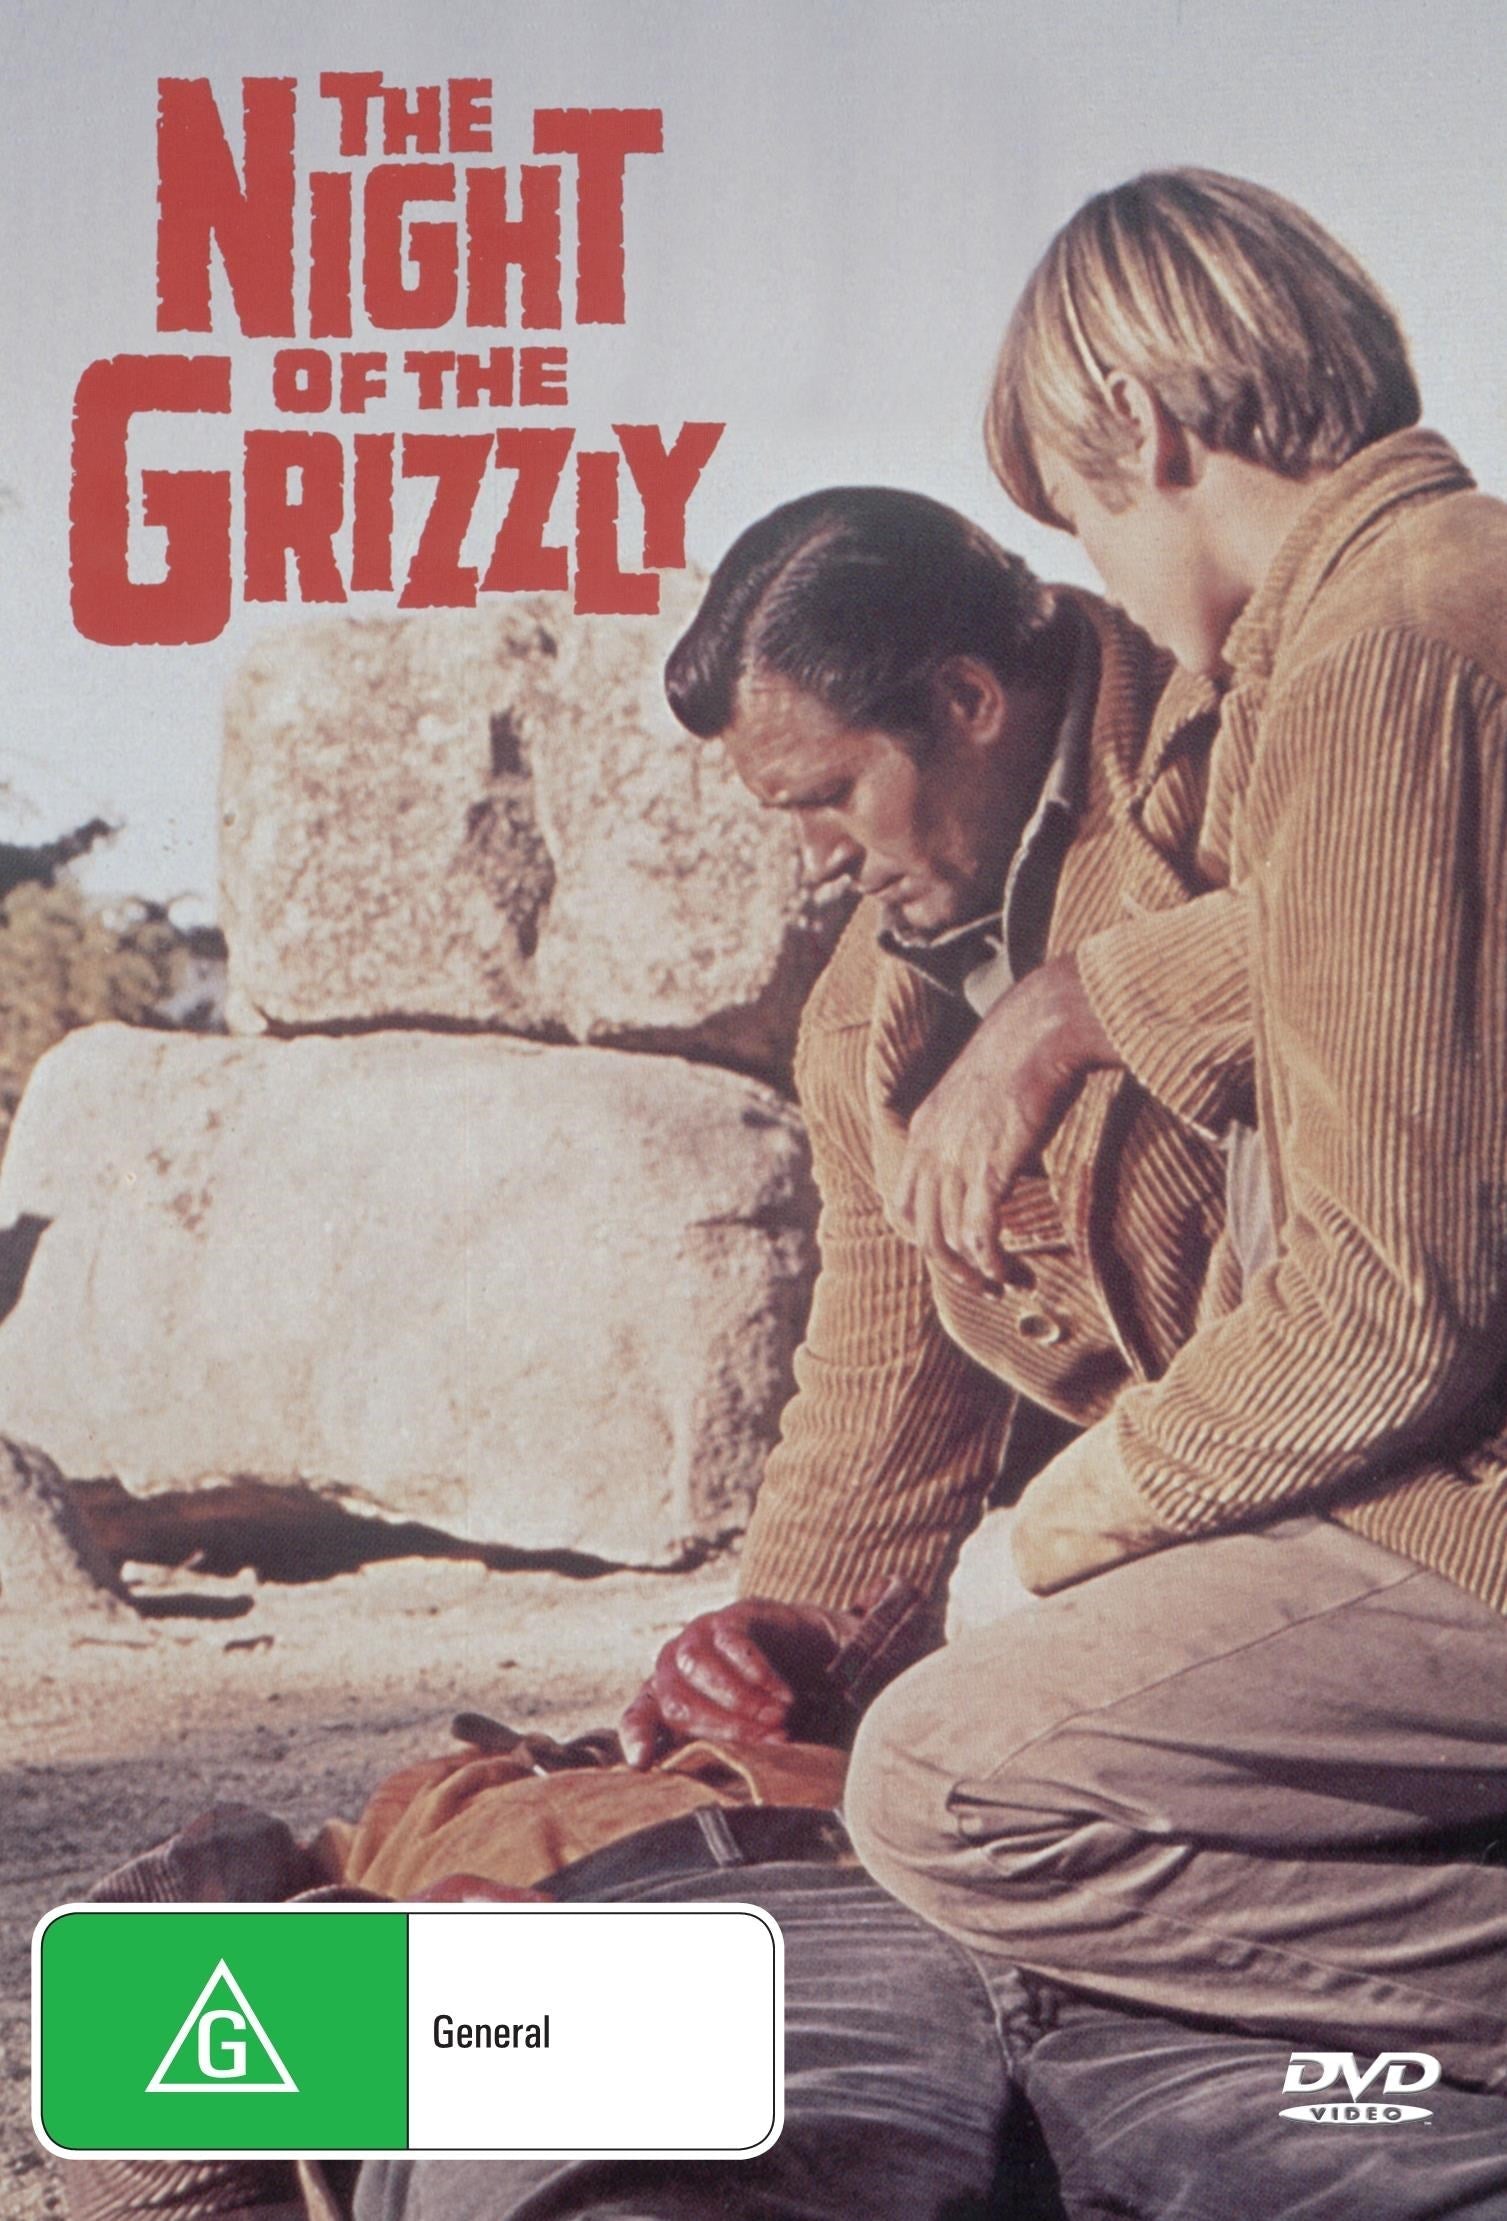 The Night Of The Grizzly rareandcollectibledvds